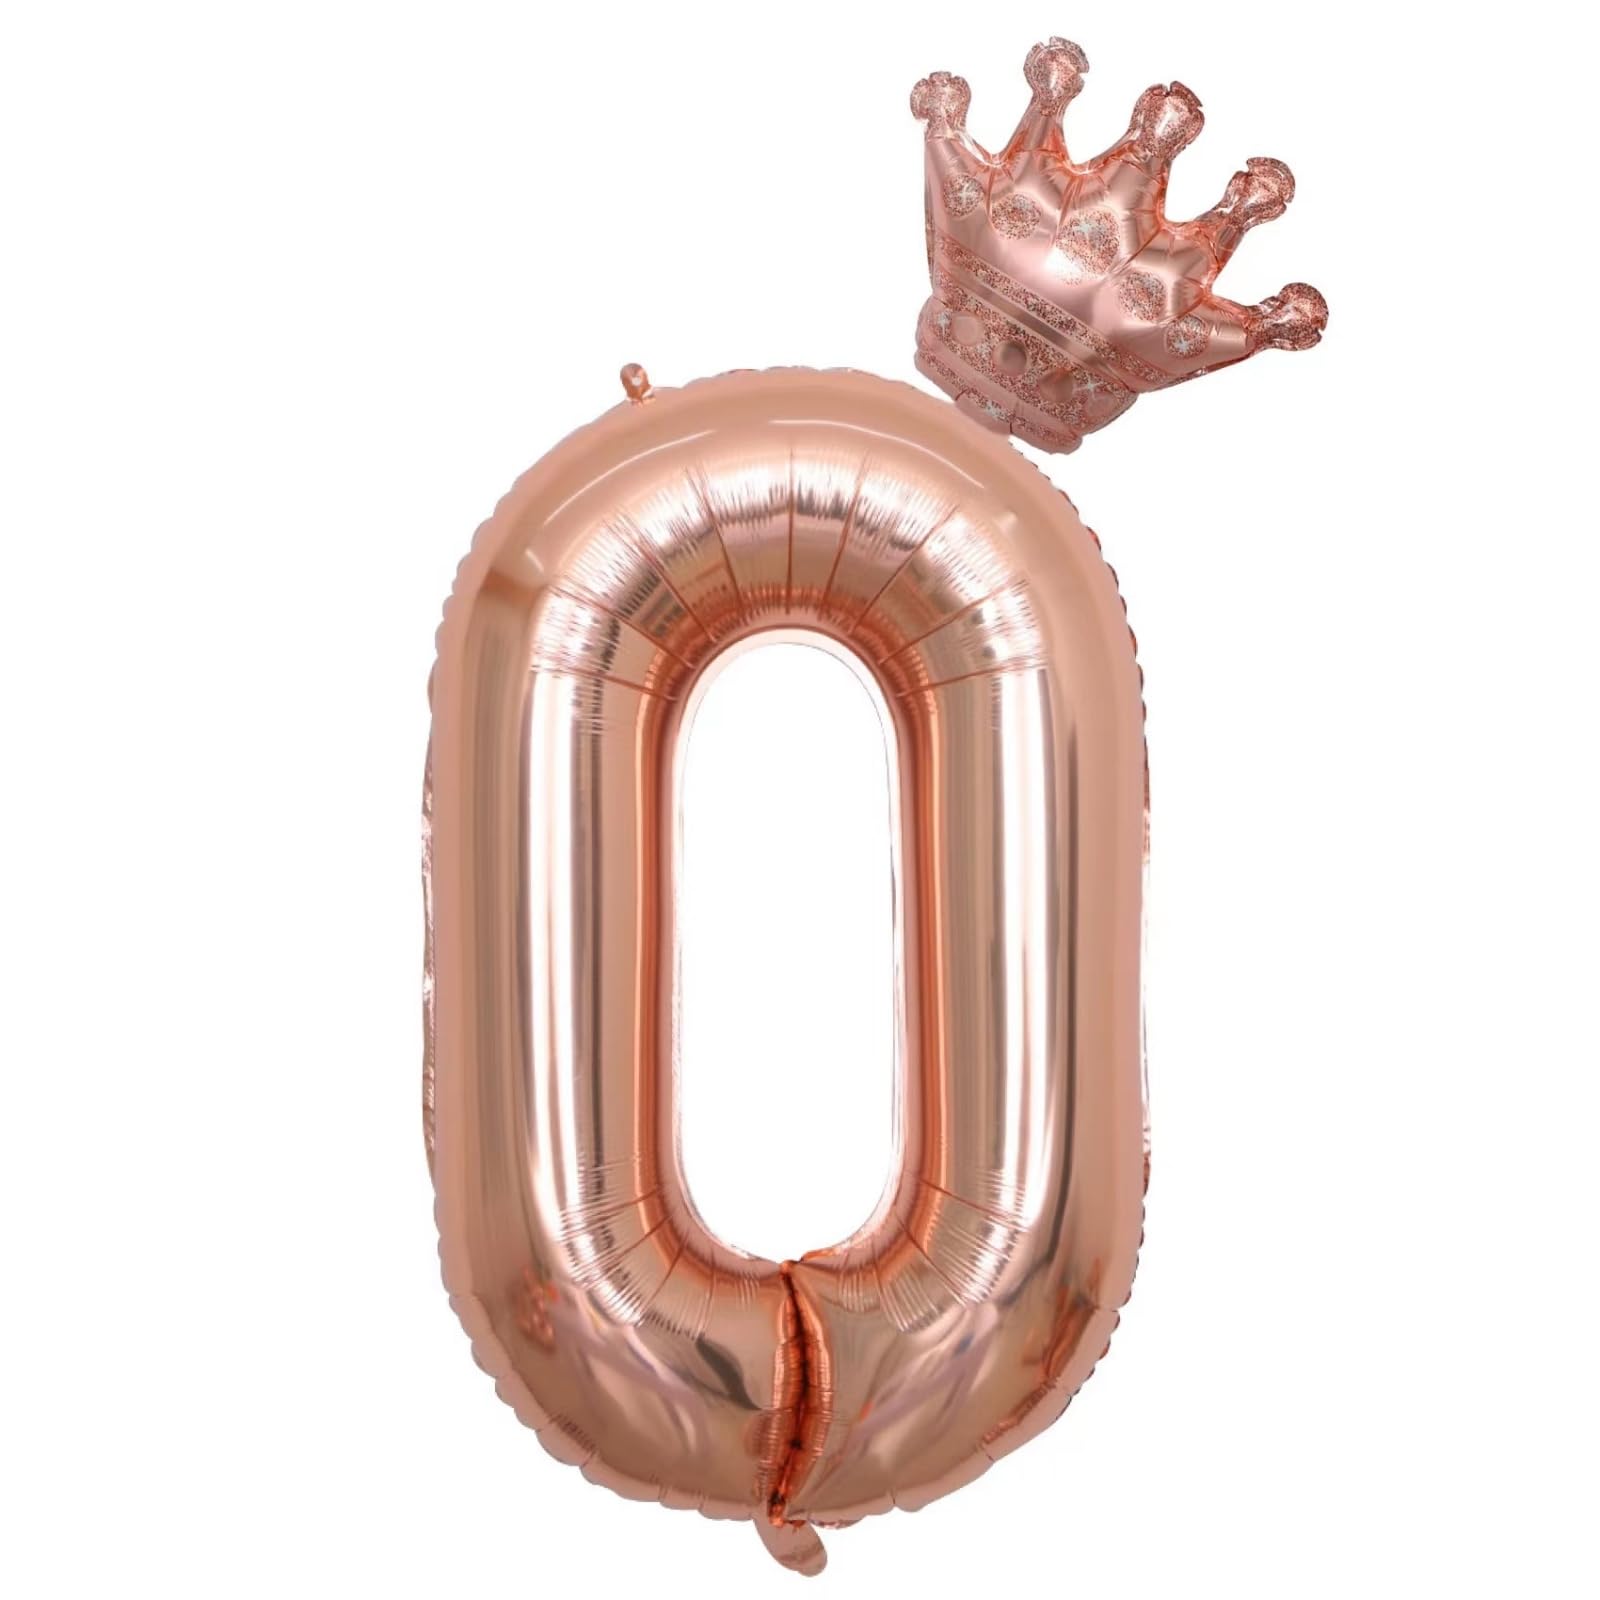 40 Inch Rose Gold Number 60 Balloons With Crown, 60th Birthday Balloons for Men and Women, 60th Birthday Decorations, Wedding Anniversar Celebration Decoration Balloons. (Rose Gold)